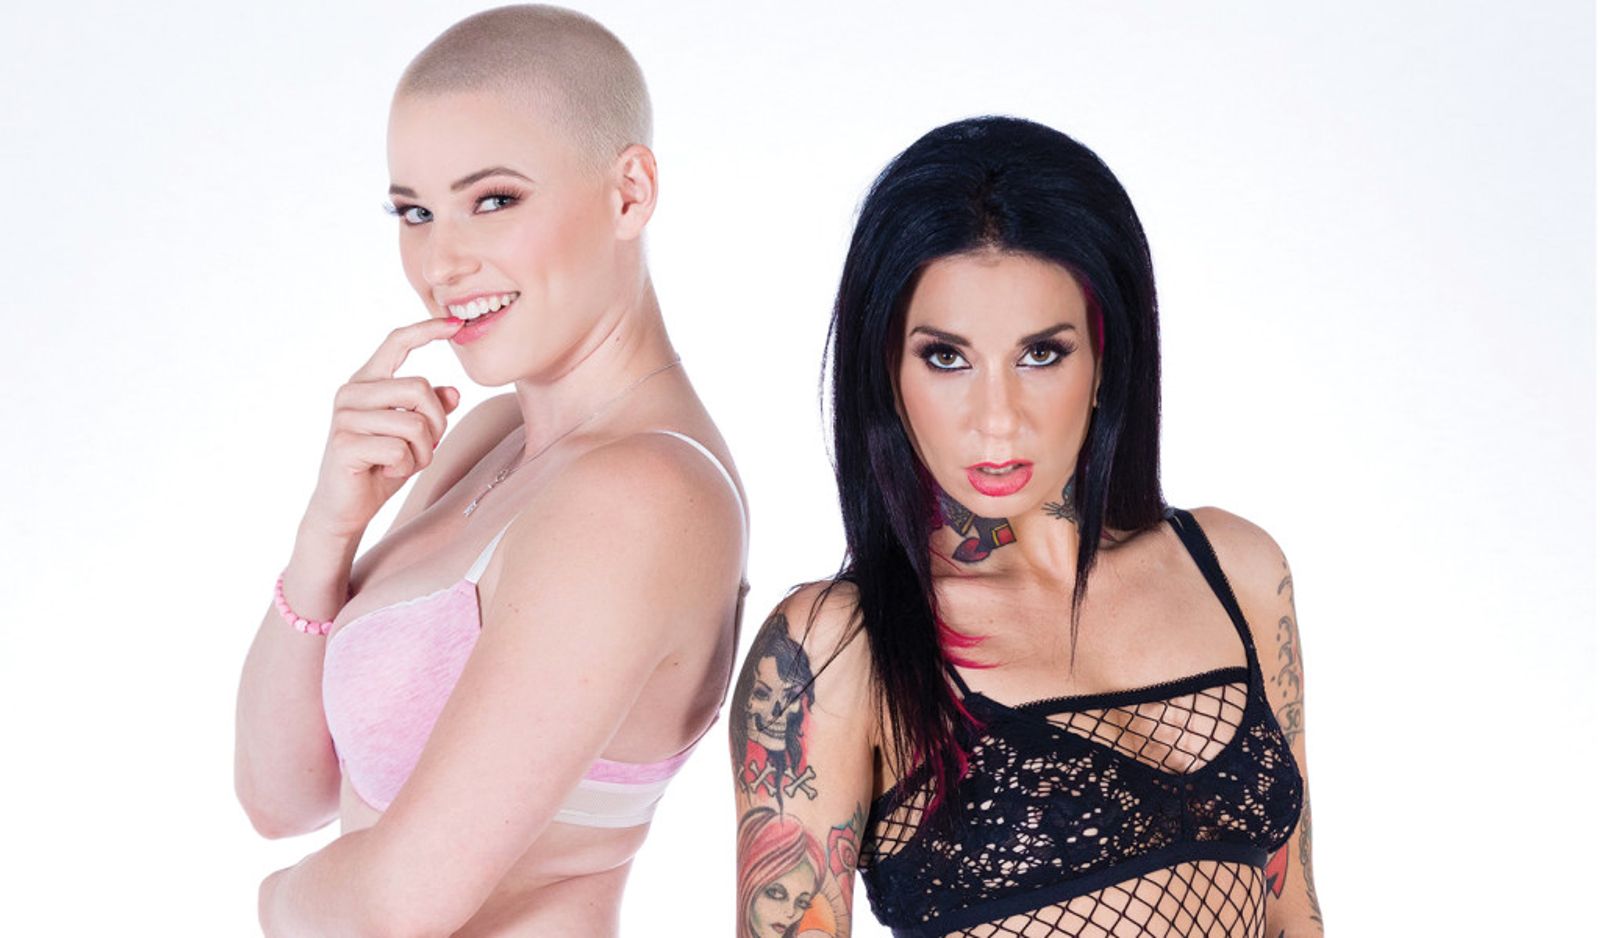 Penthouse to Debut Joanna Angel's 'Corrupted by an Angel' Friday